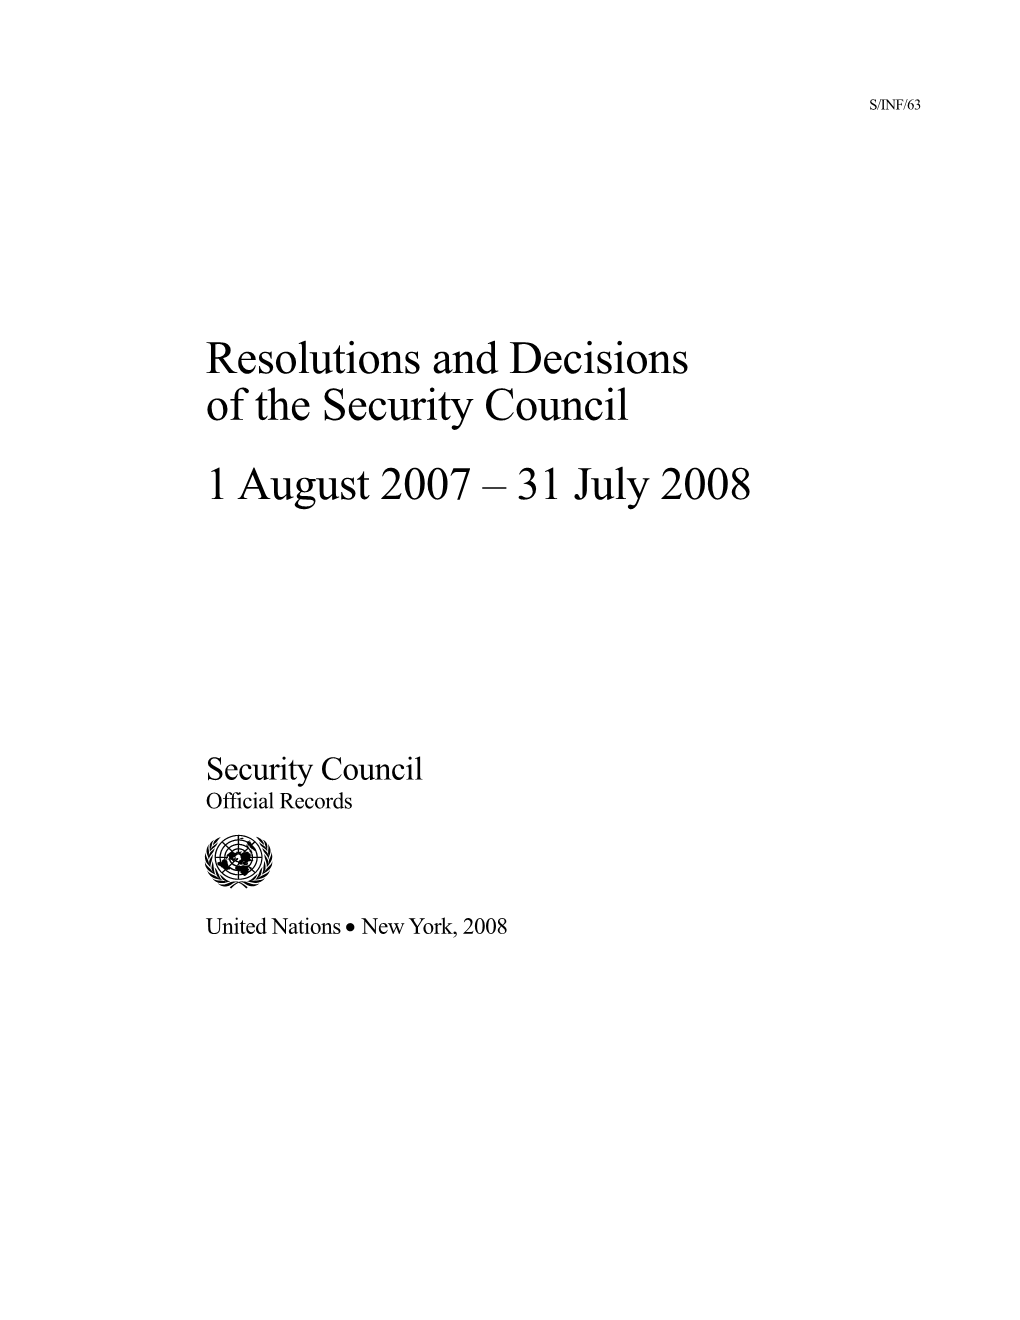 Resolutions and Decisions of the Security Council 1 August 2007